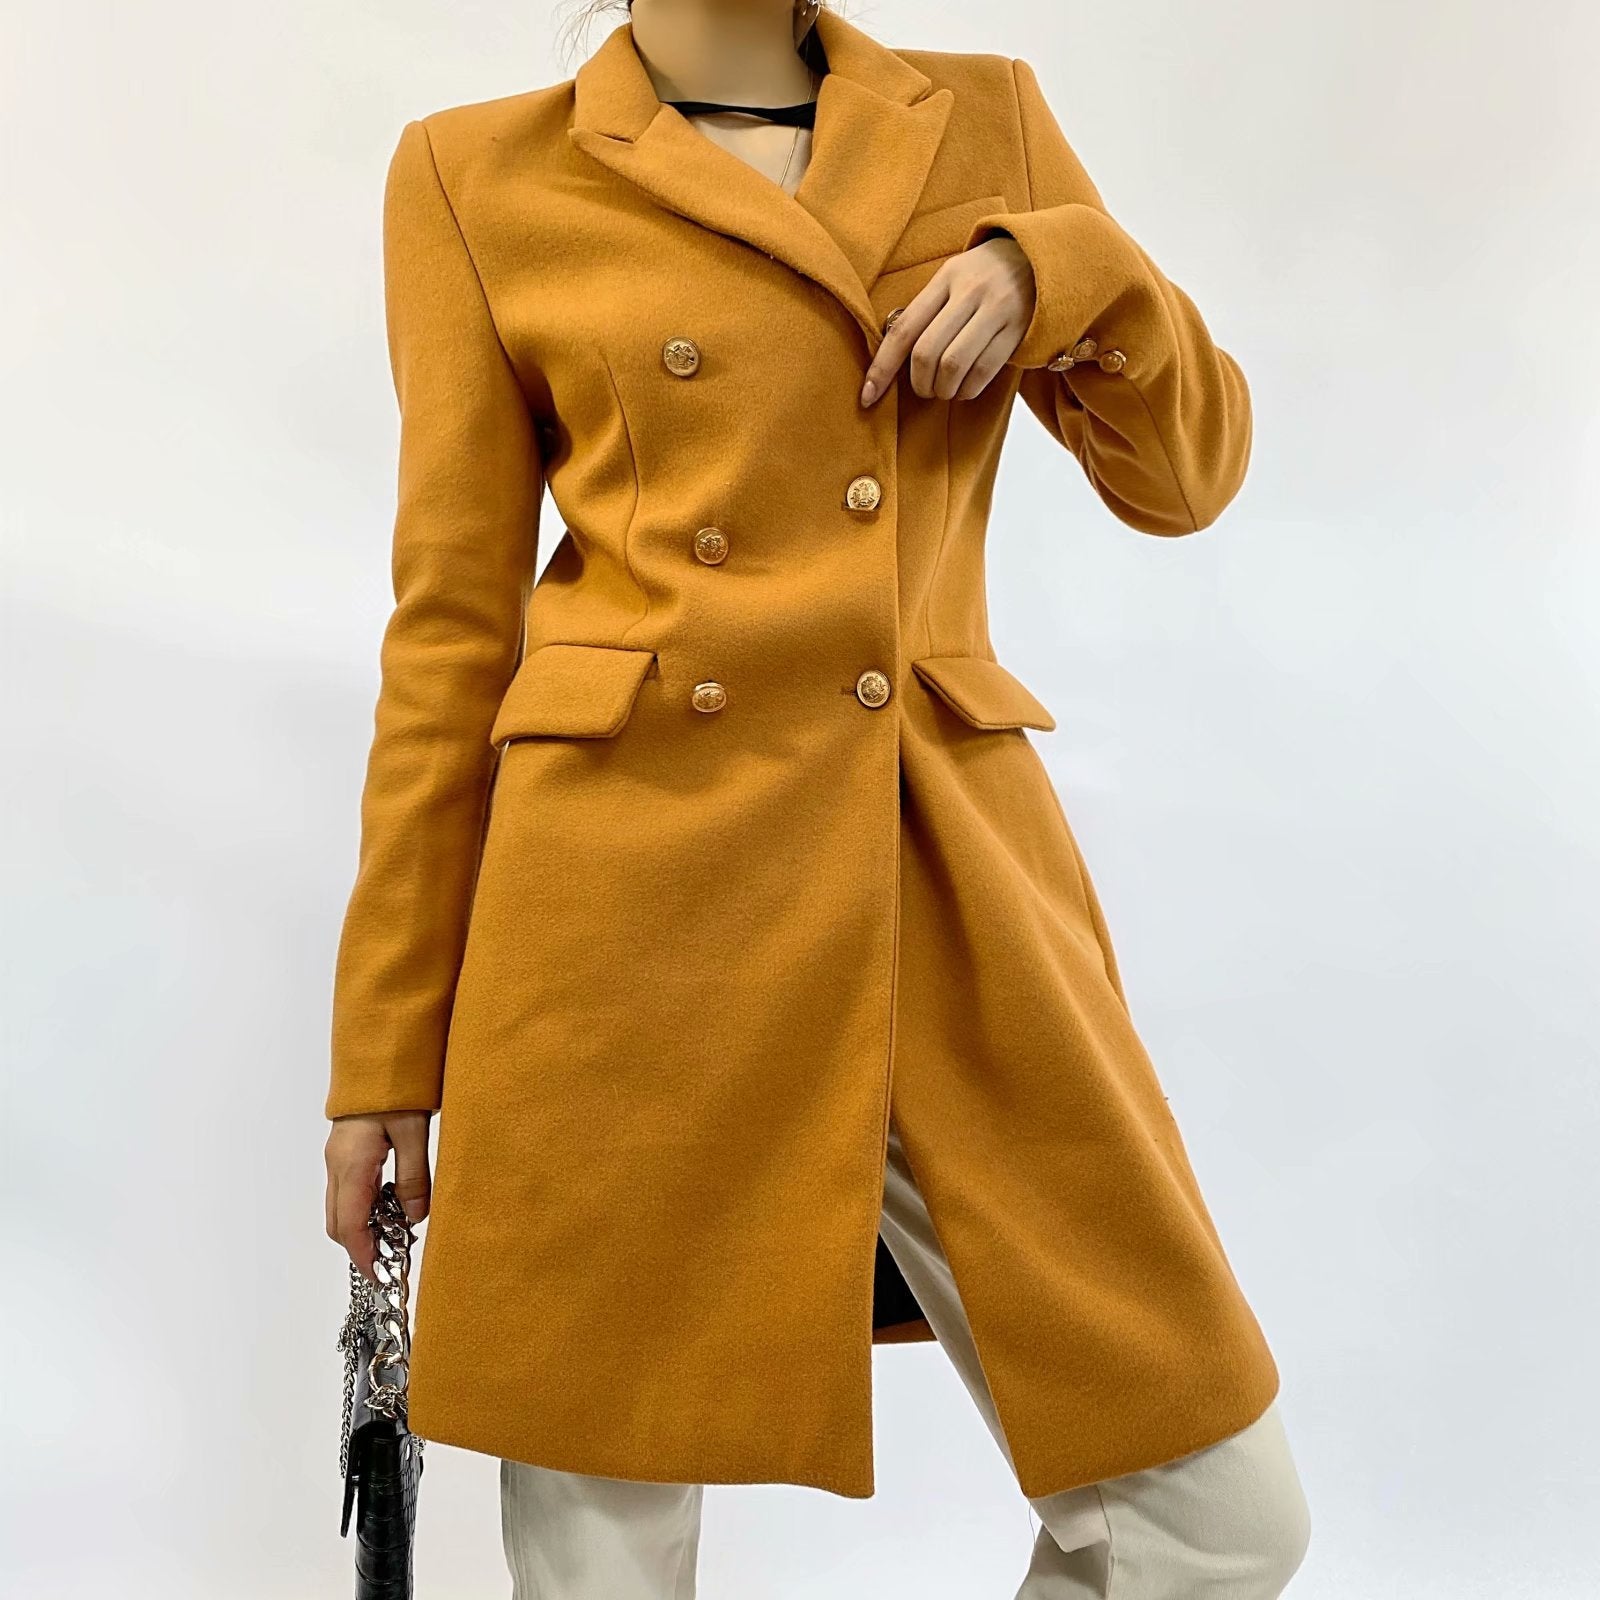 OOTDGIRL Women's 2022 Autumn And Winter New Fashion All-Match Slim Coat Retro Double-Breasted Mid-Length  Coat